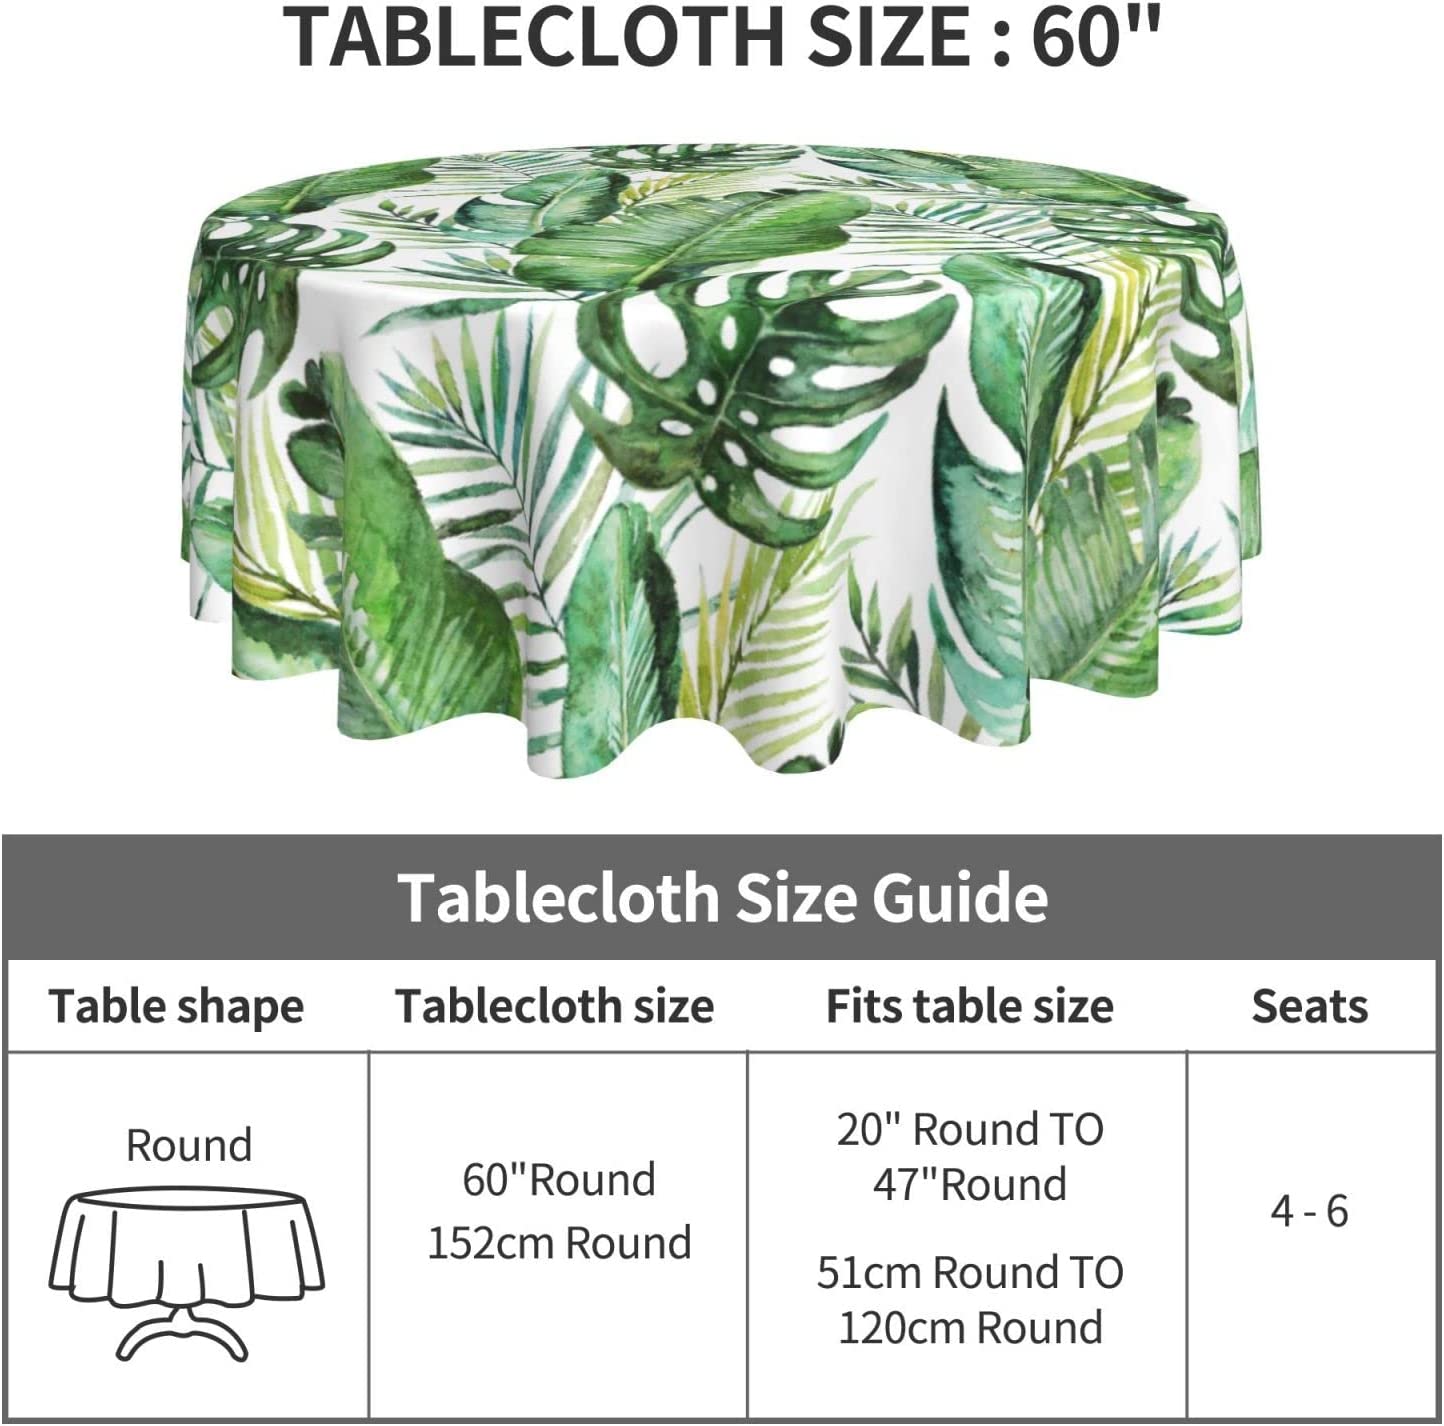 Pineapple Tablecloths